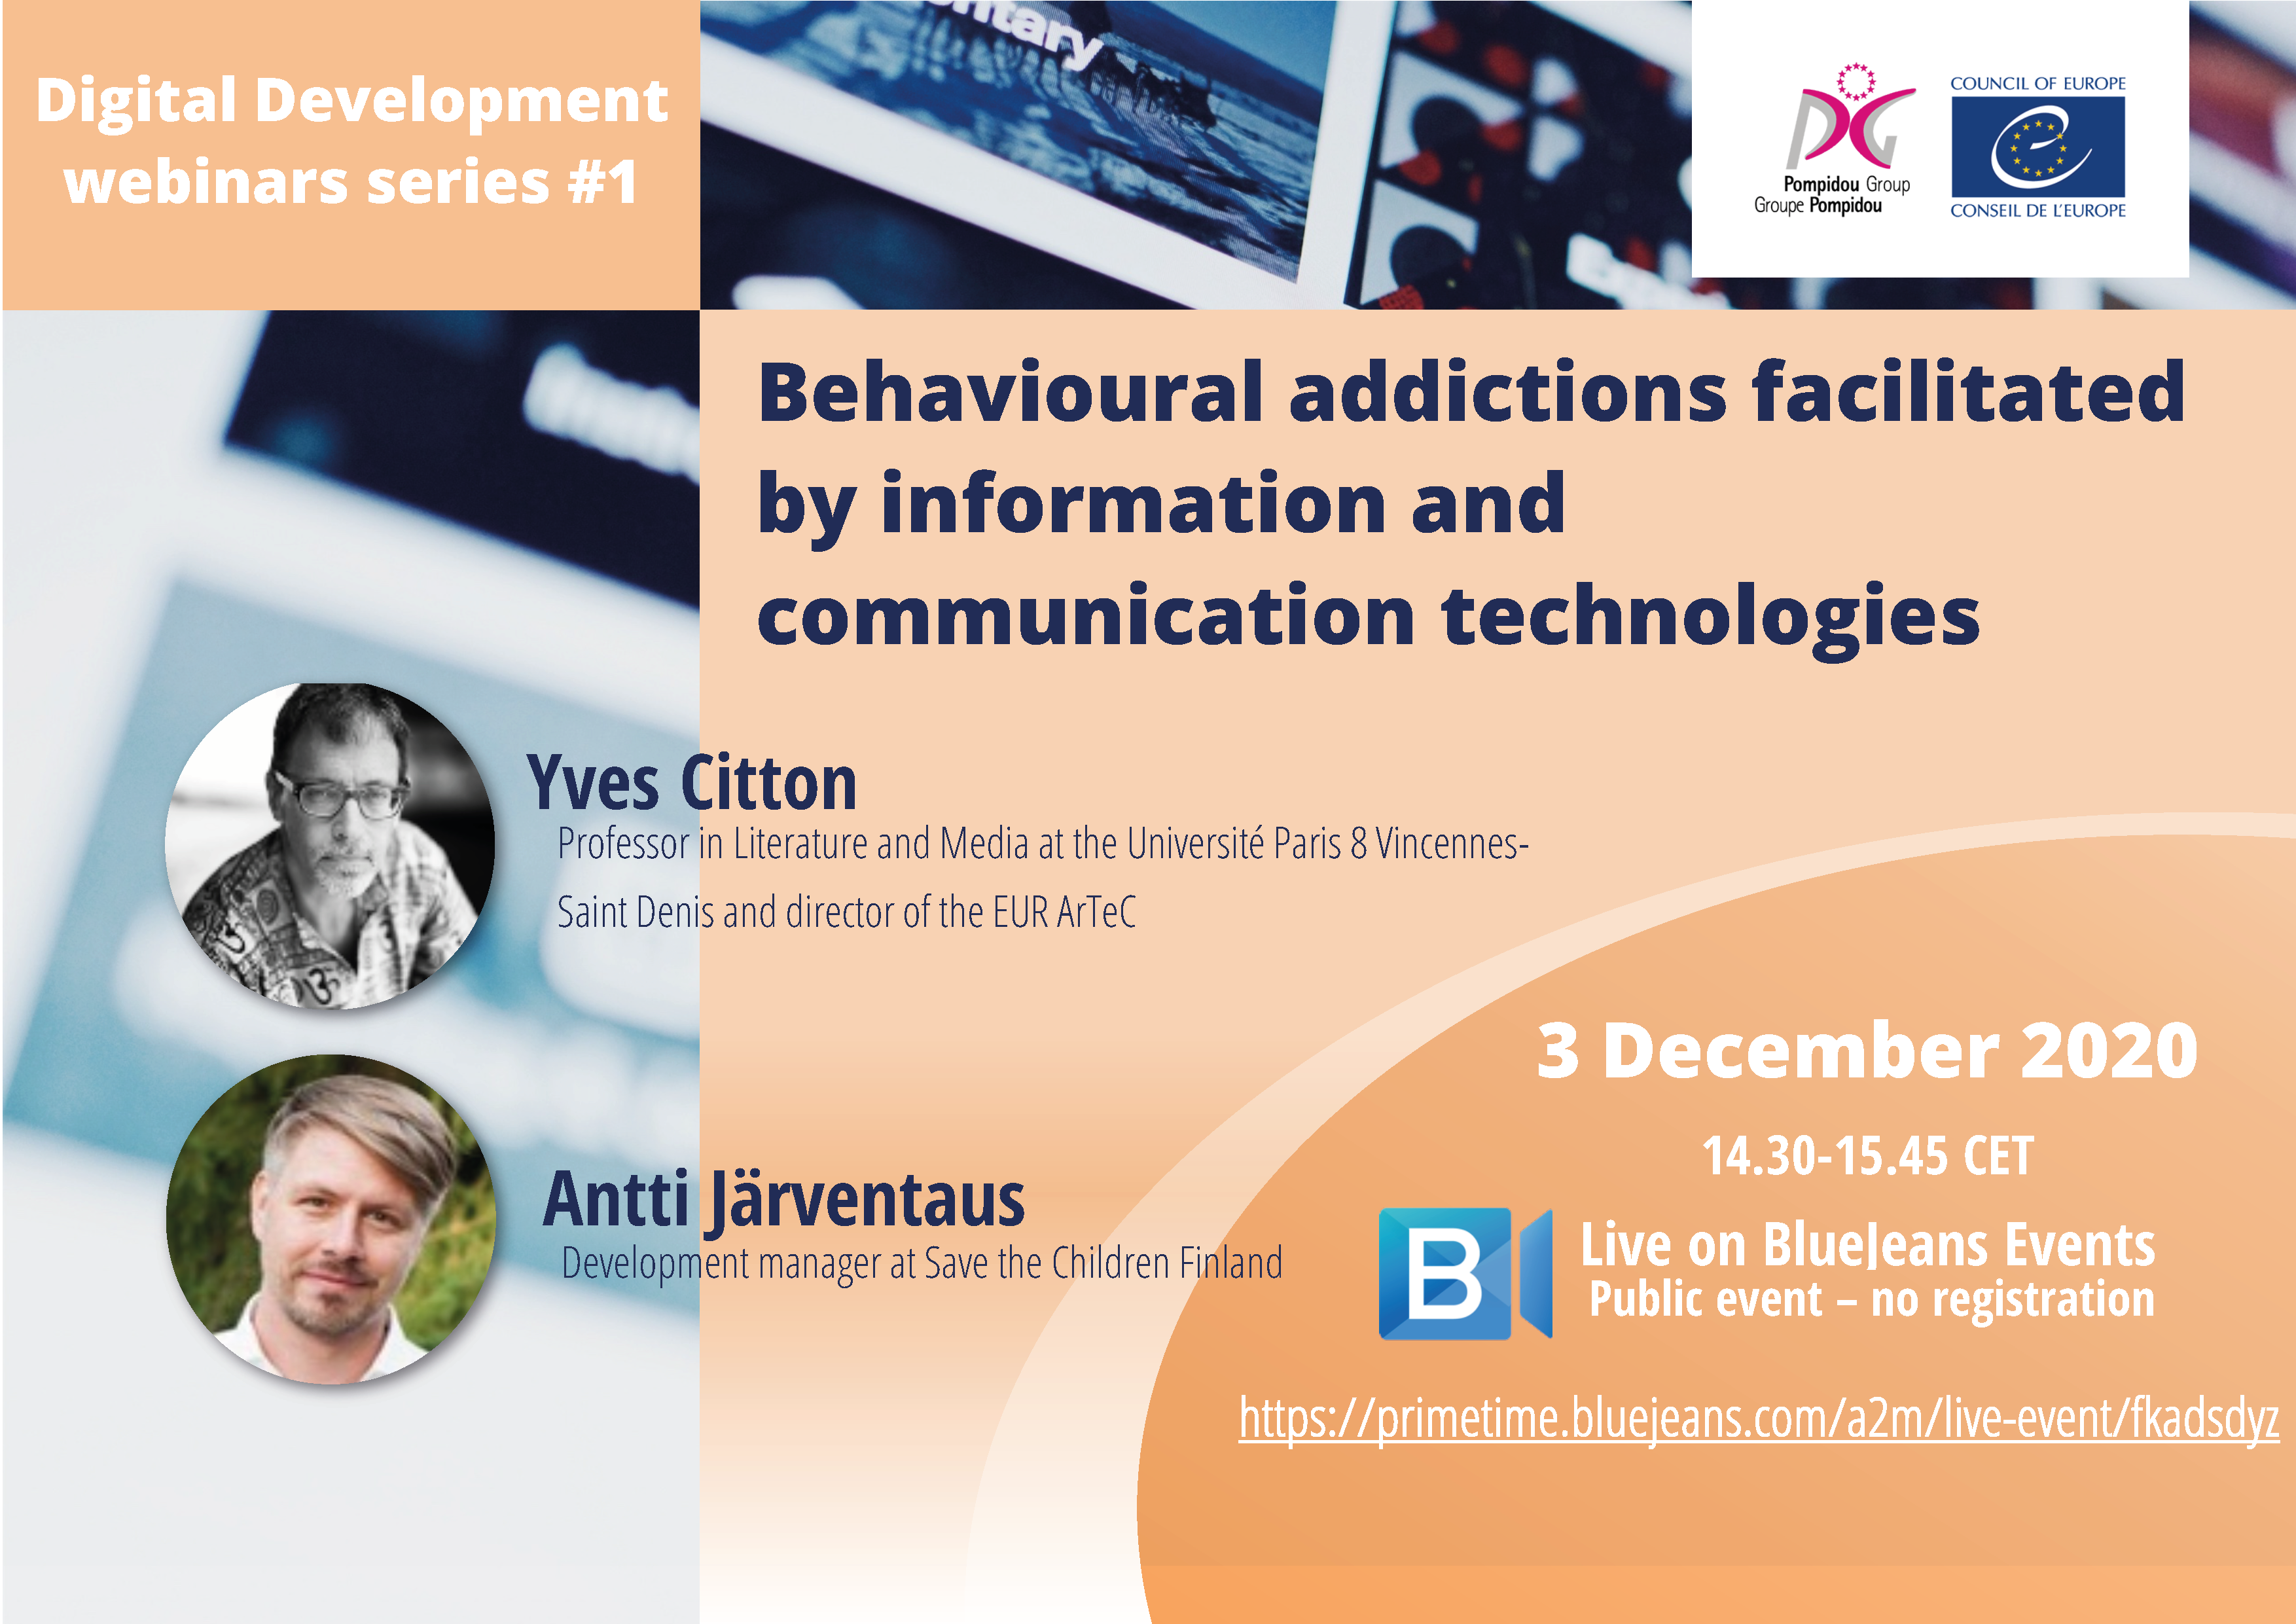 Behavioural addictions facilitated by information and communication technologies – risks and perspectives